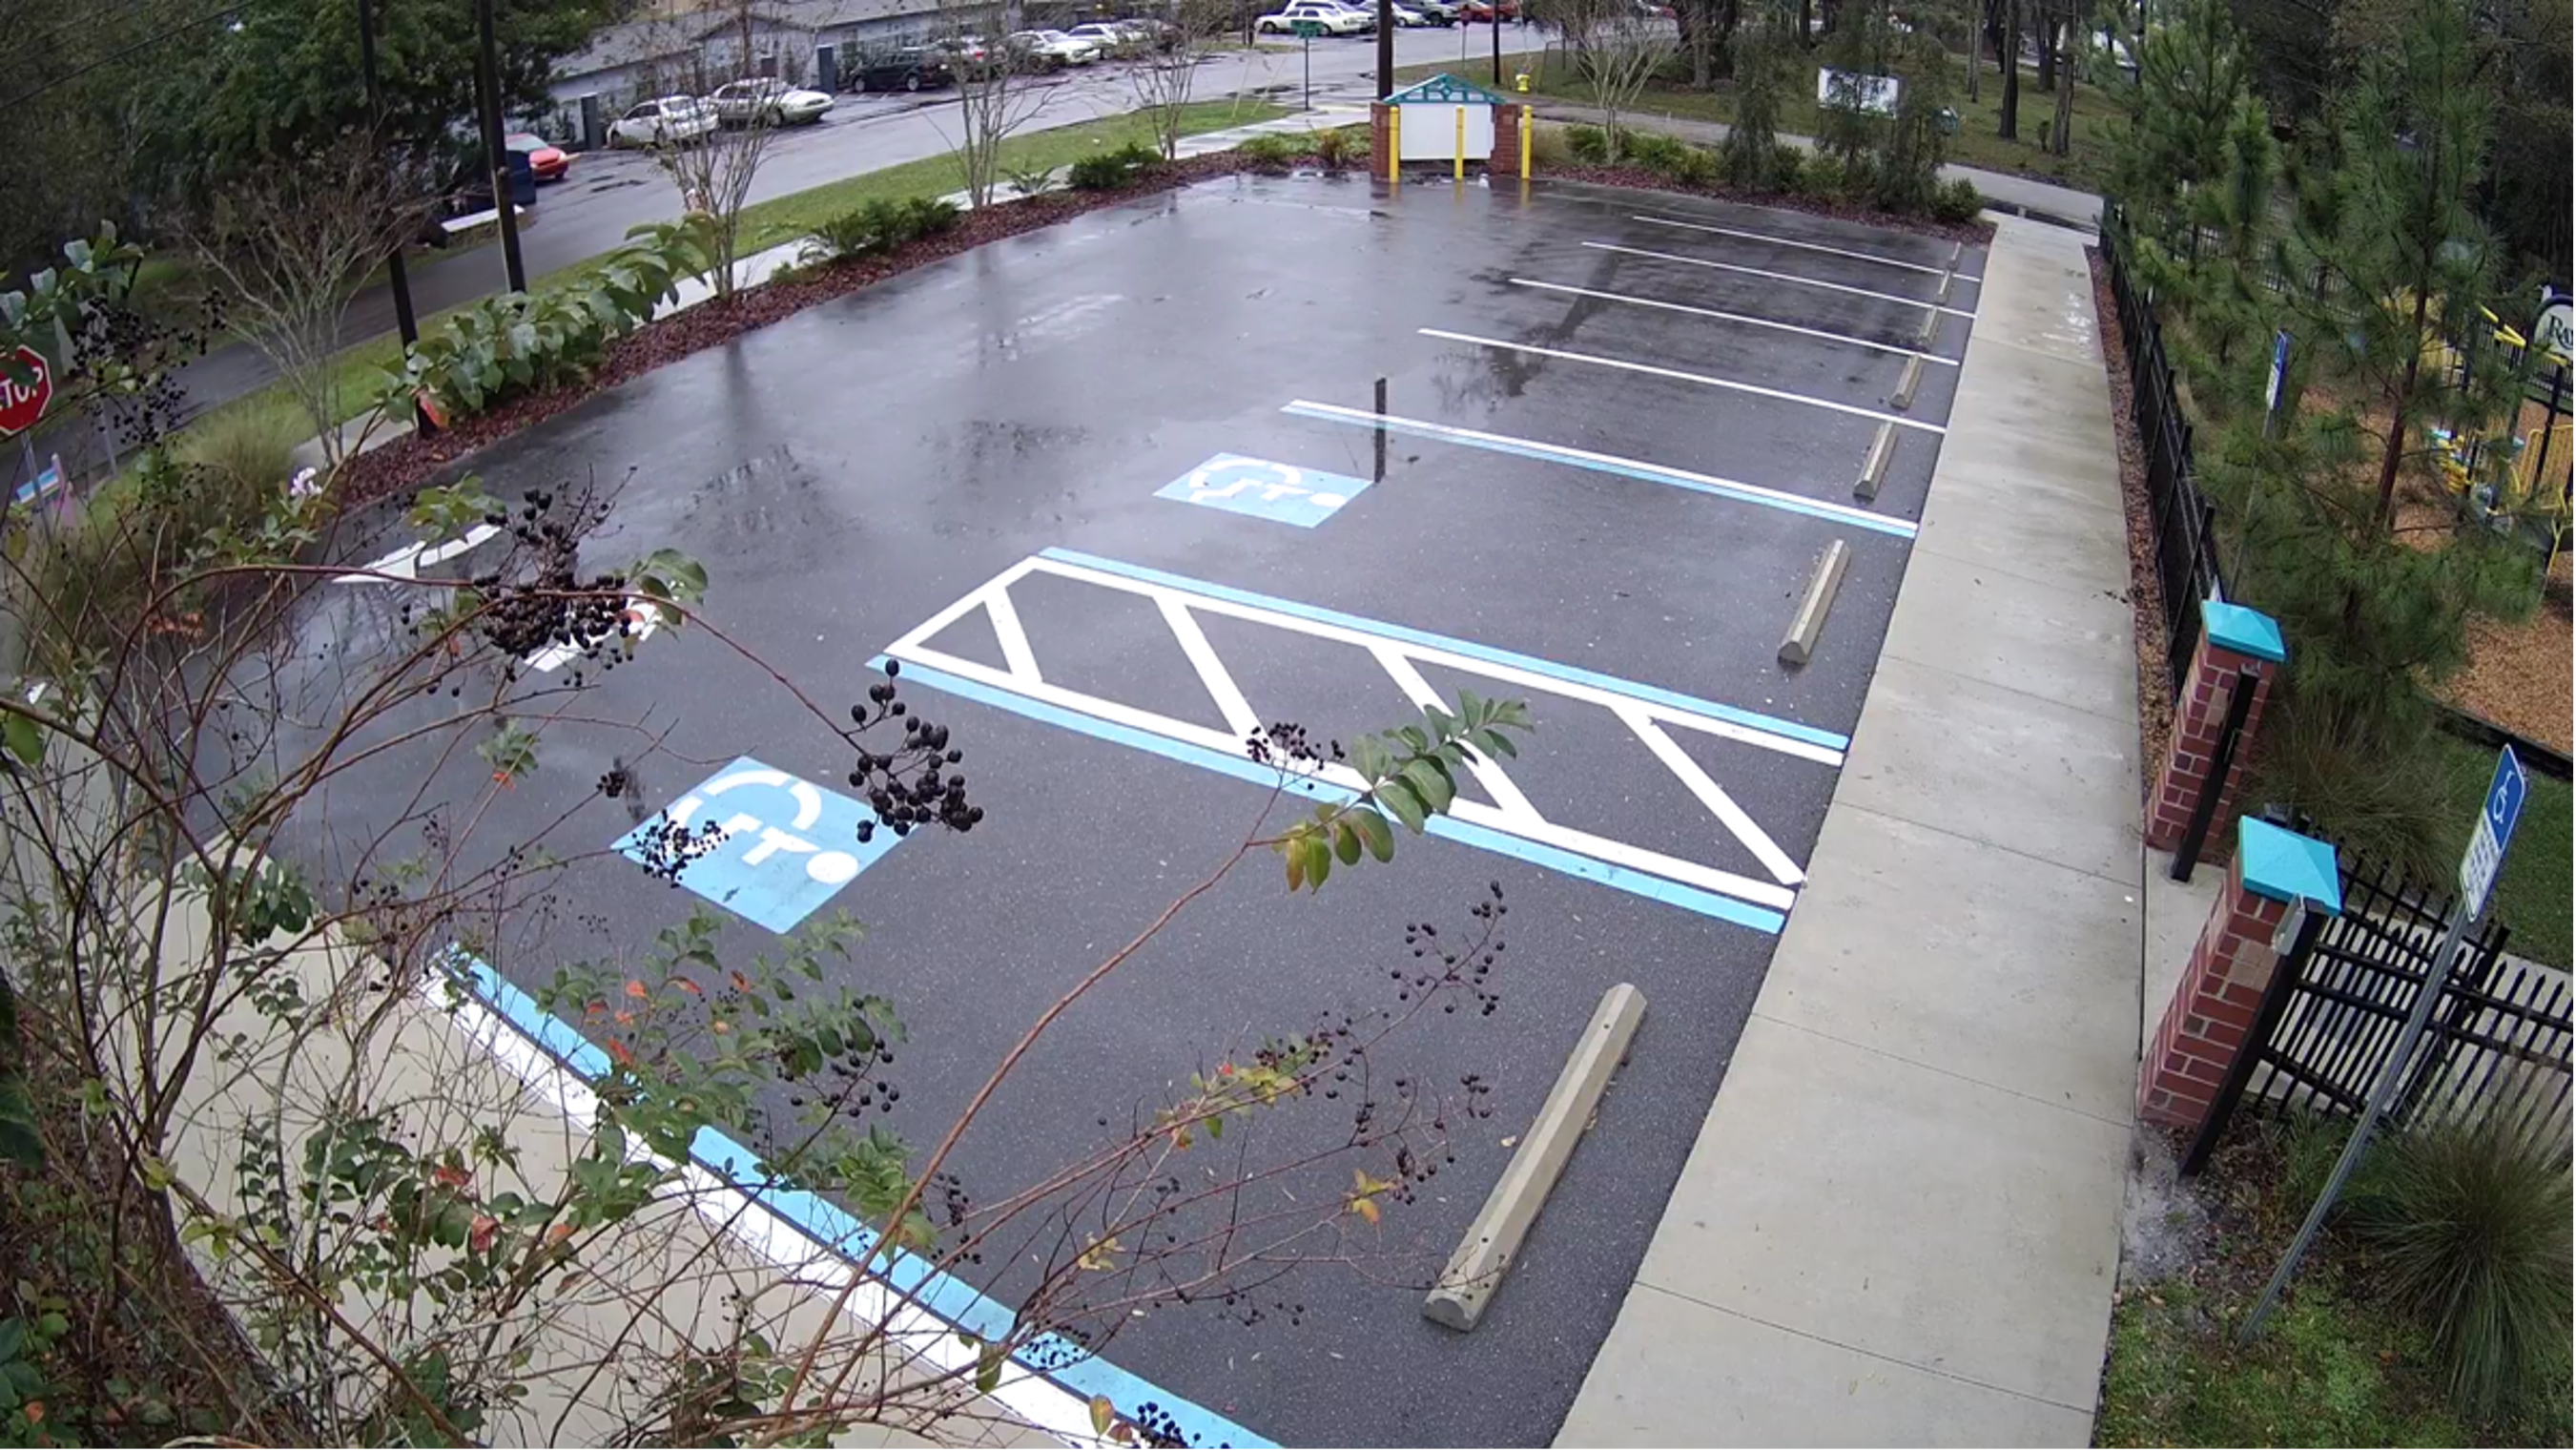 rhombus-video-surveillance-parking-lot-camera-security-car-vehicle-outdoor-safety